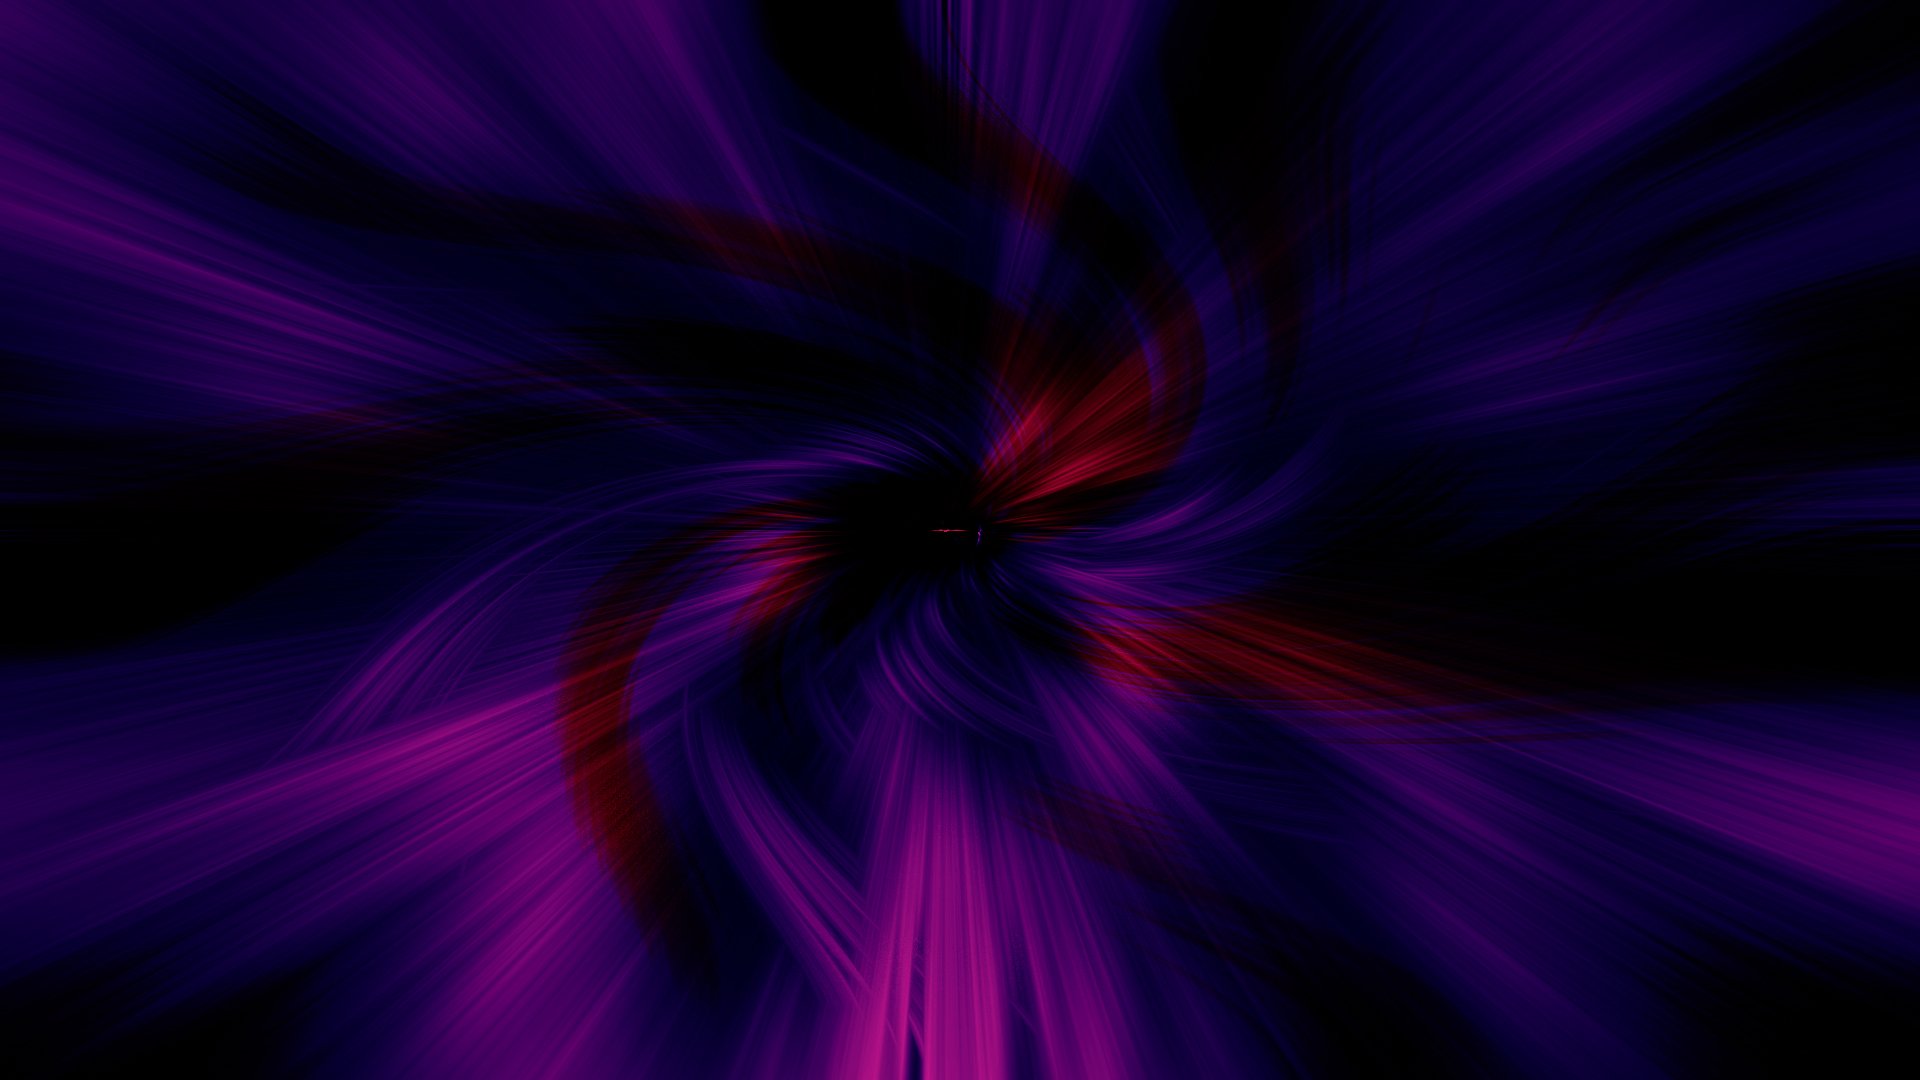 Abstract Swirl HD Wallpaper by Skyrath 333